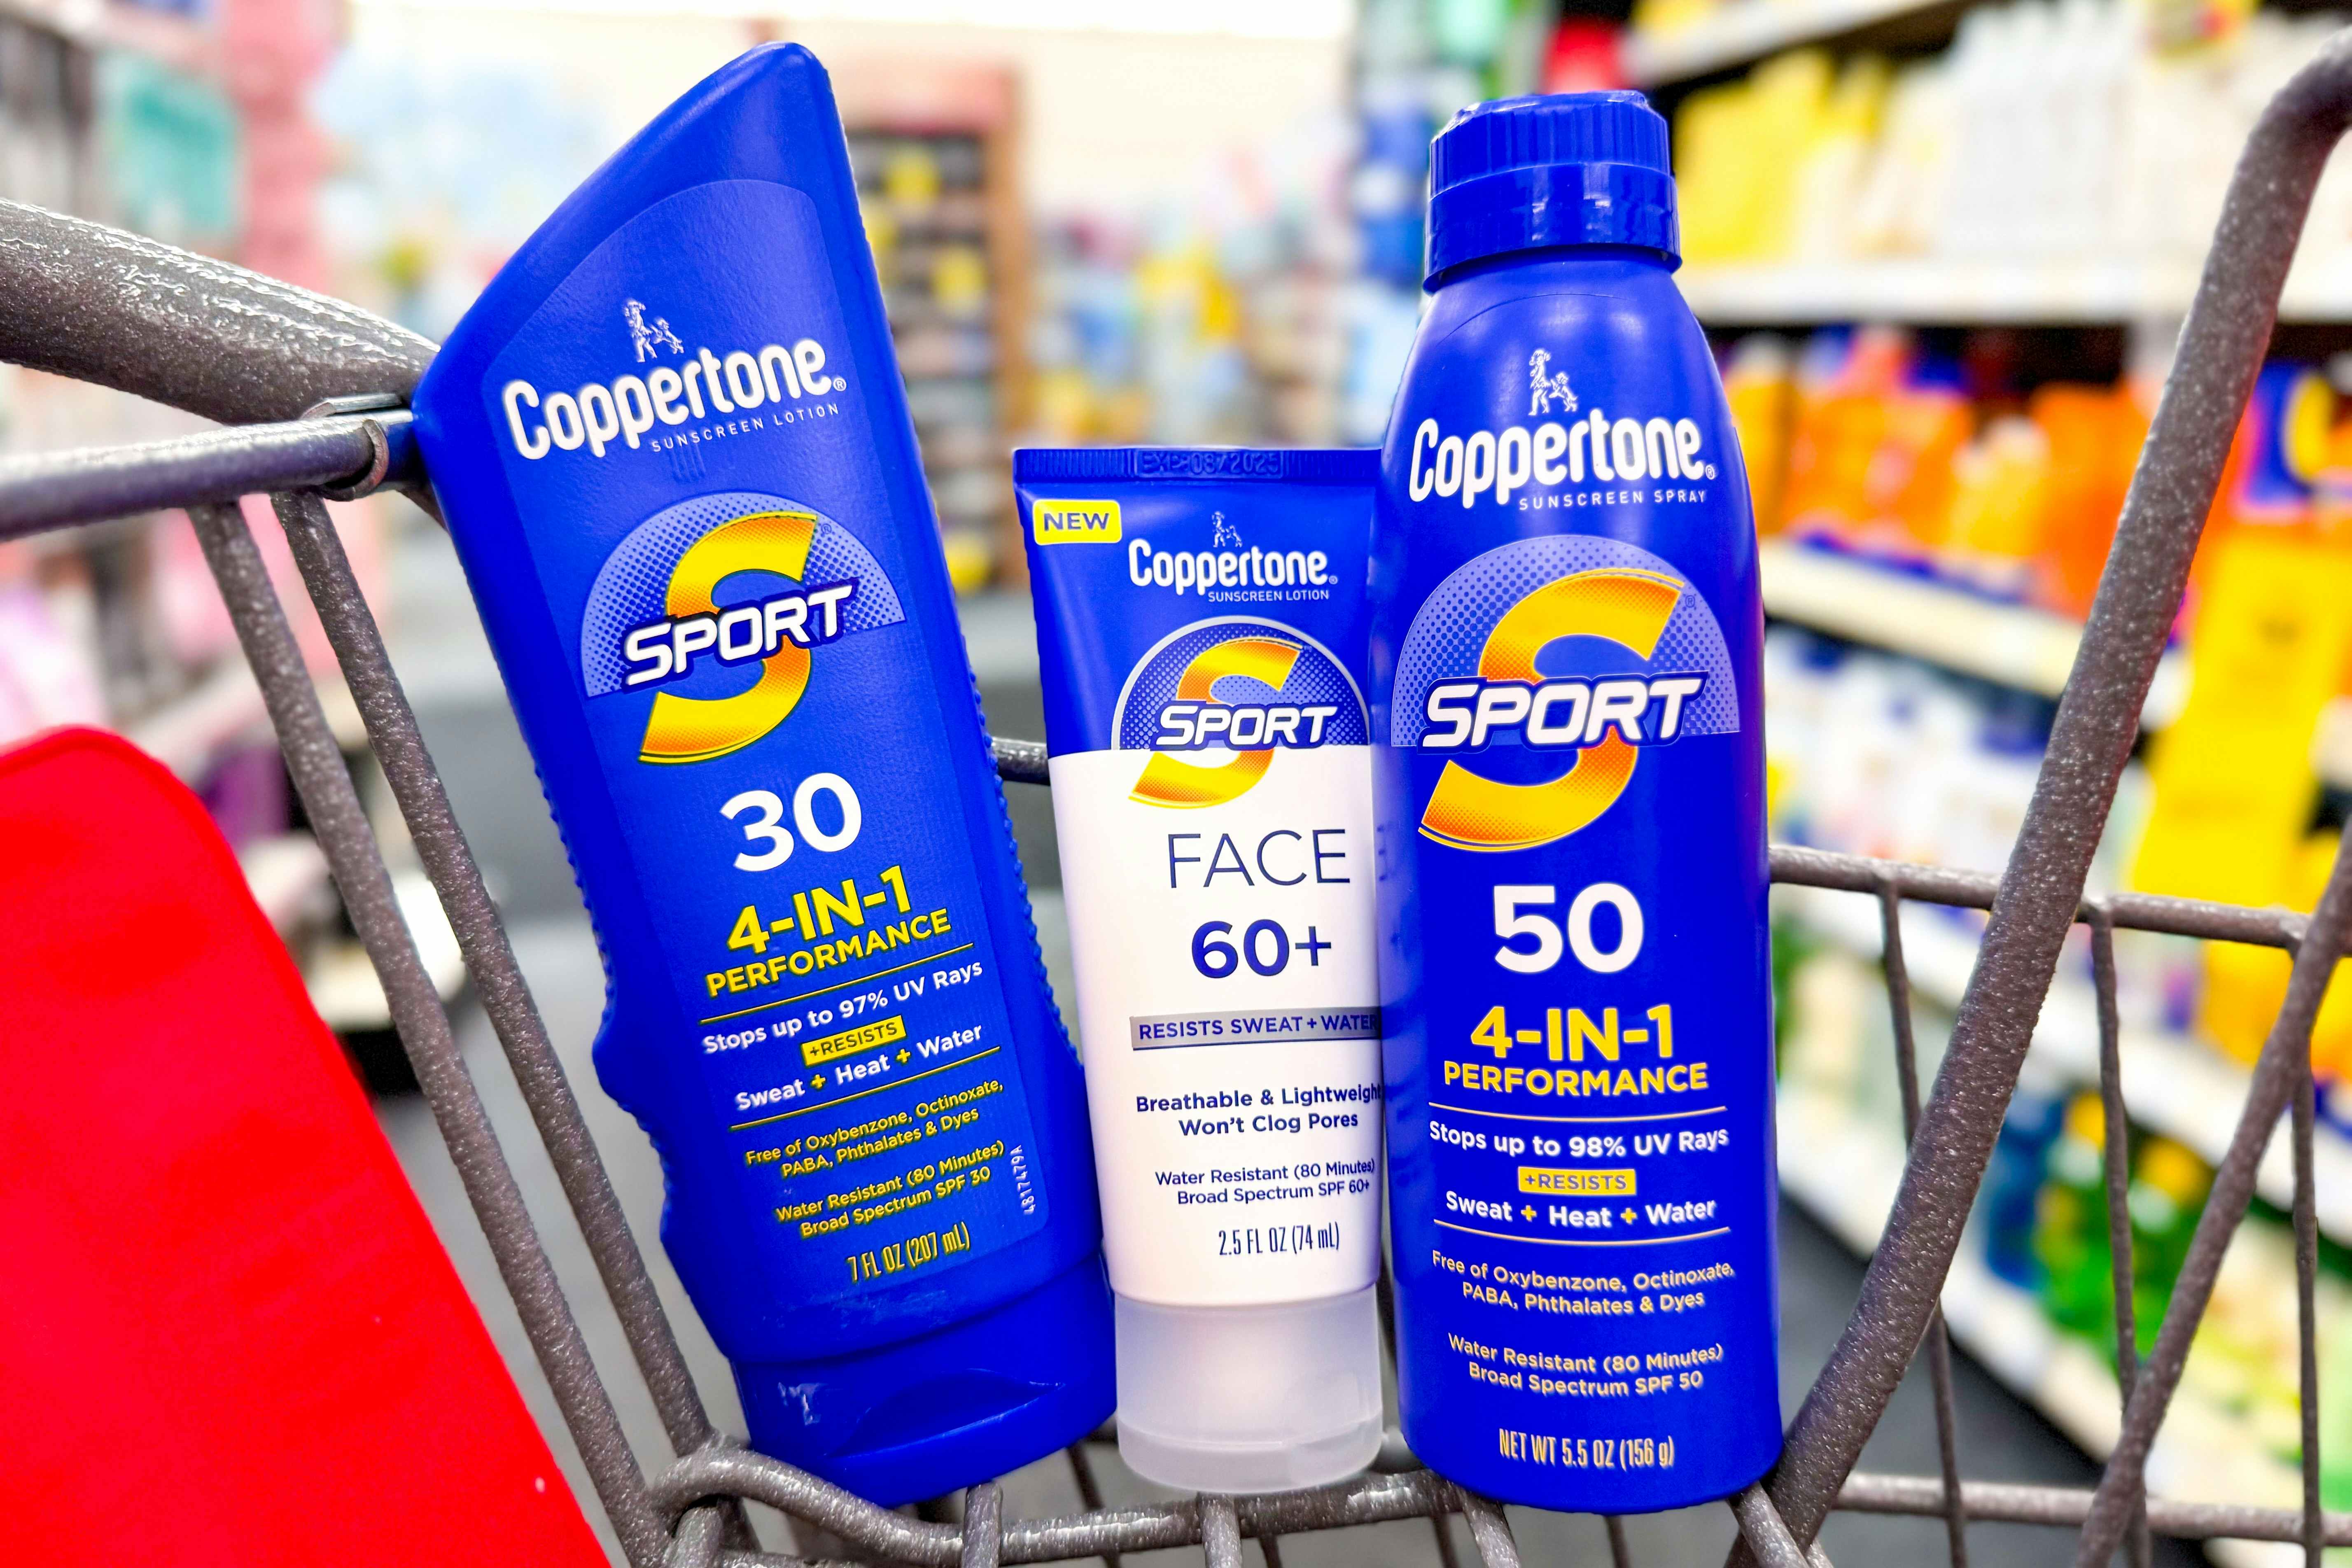 Easy CVS Deal: Get Coppertone Sunscreen for as Low as $4.99 Each